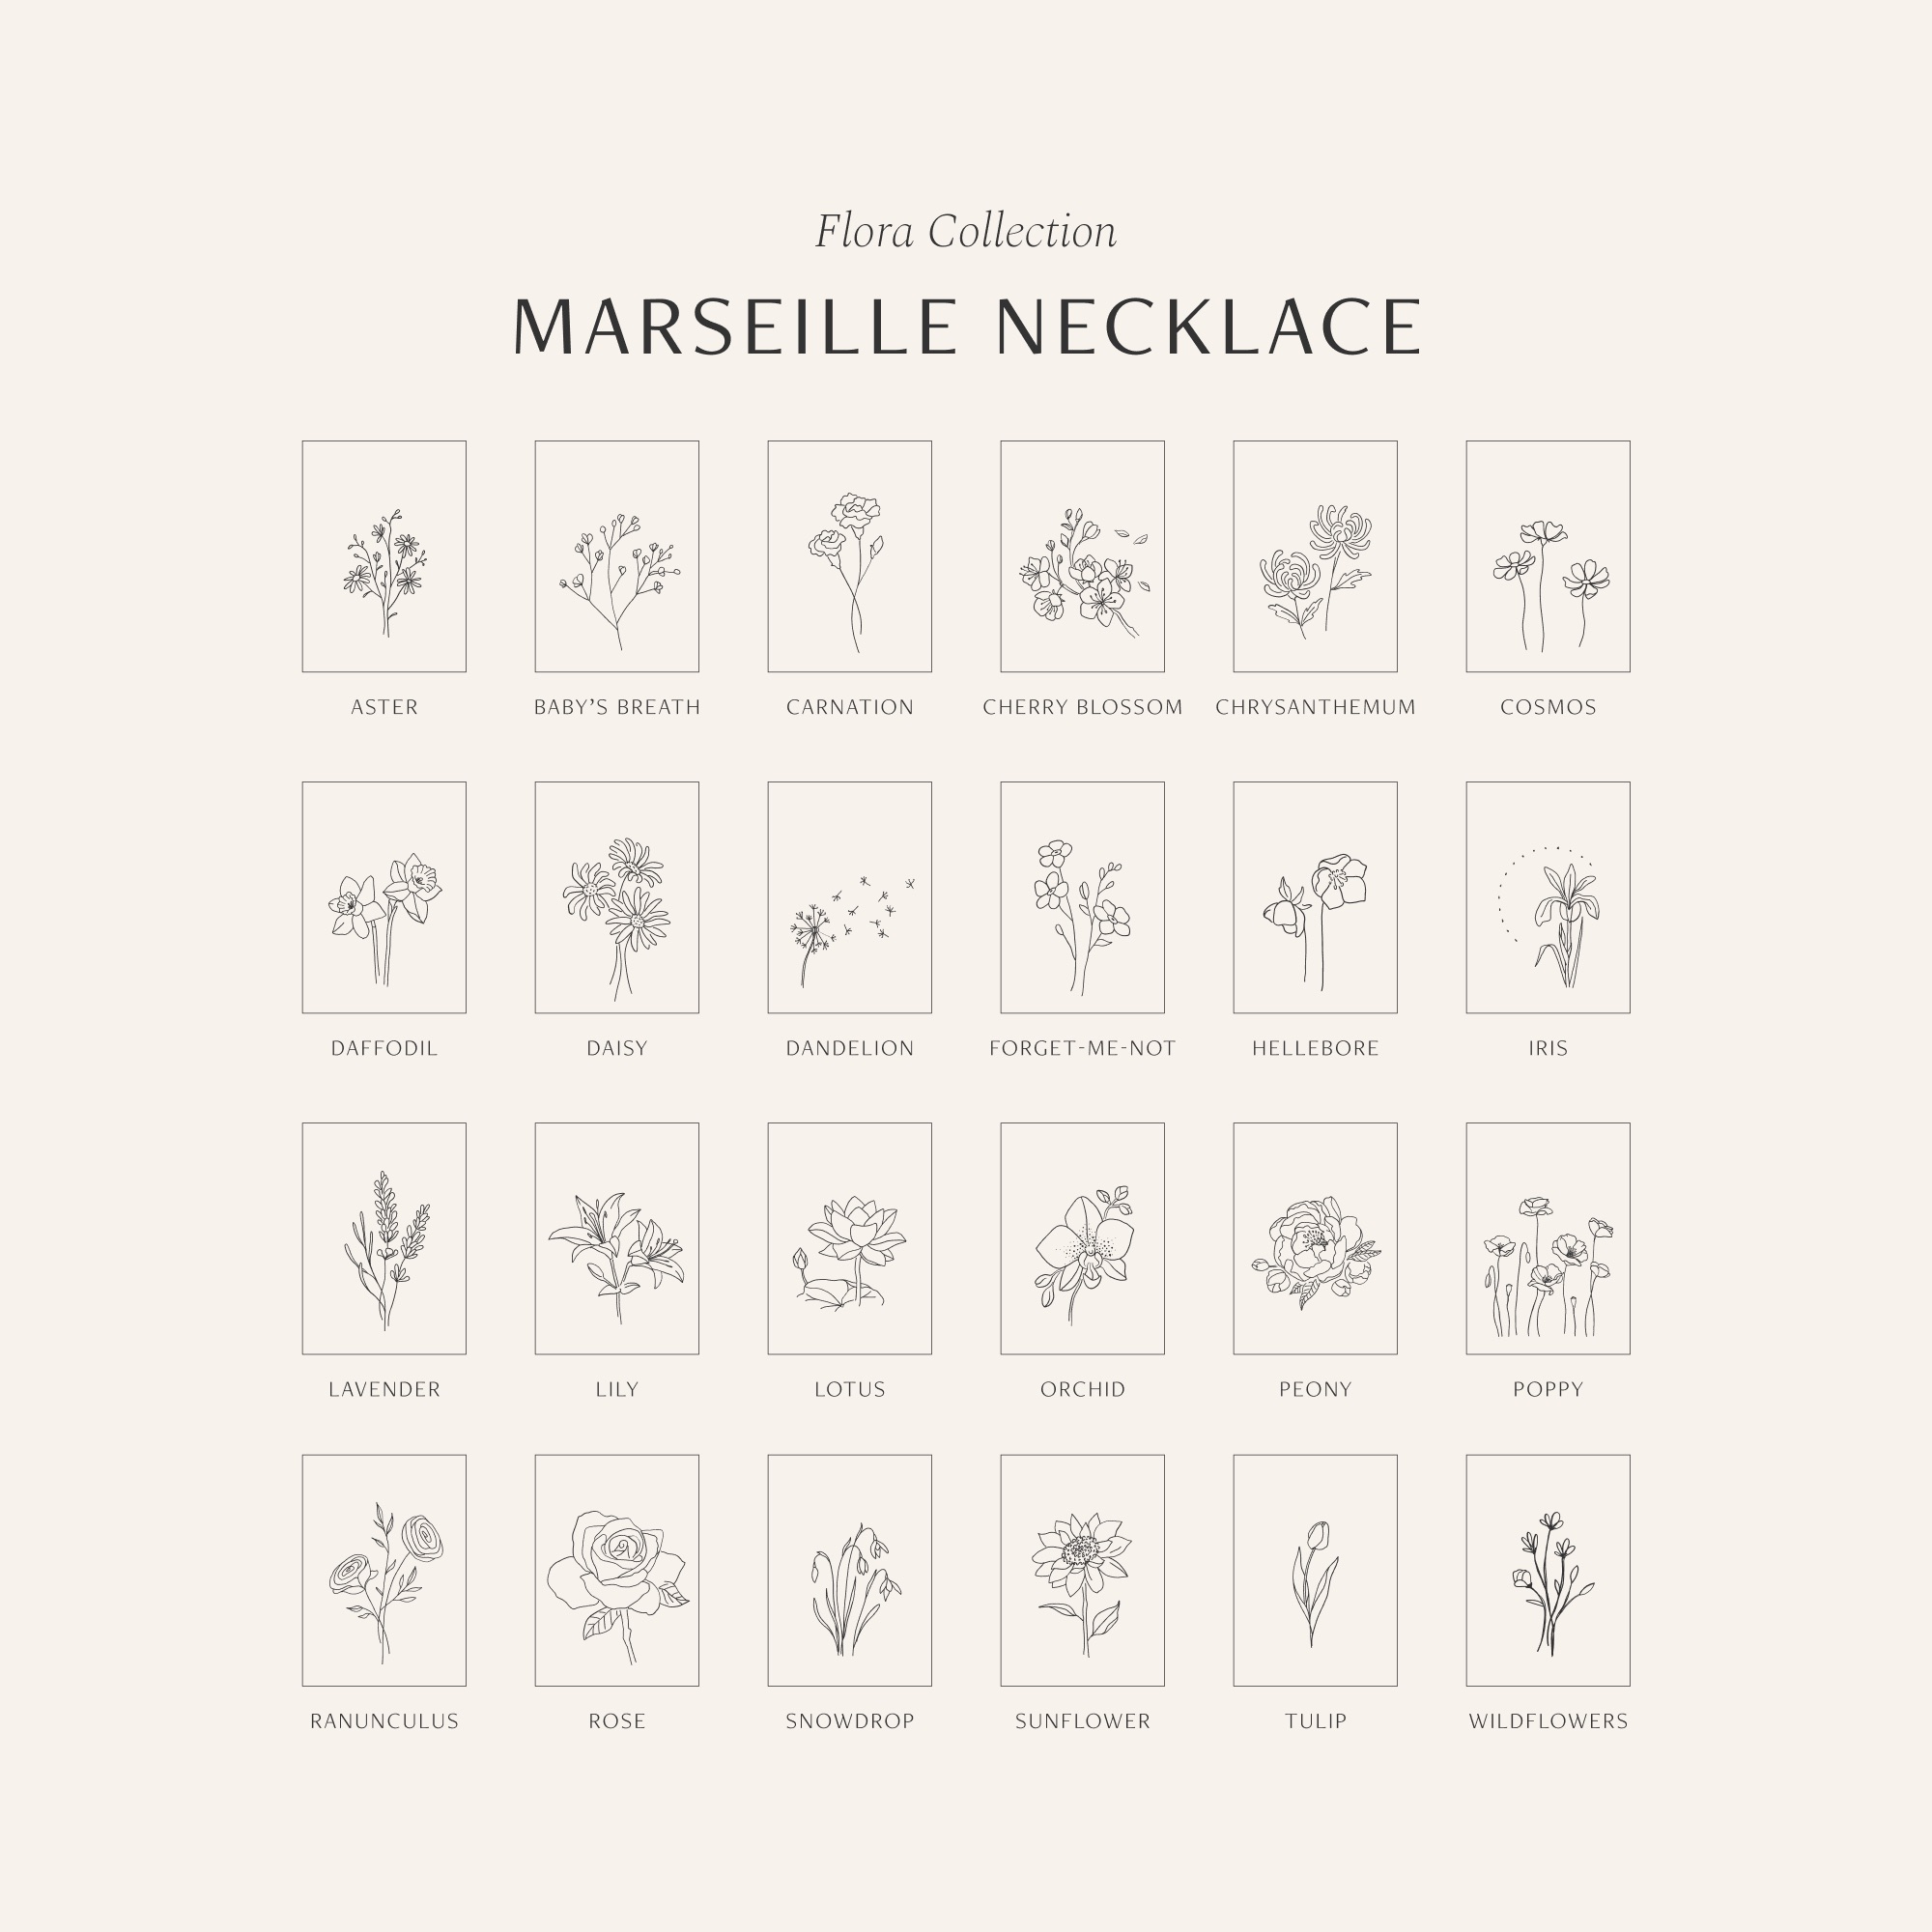 Chart of Marseille Necklace options from GLDN